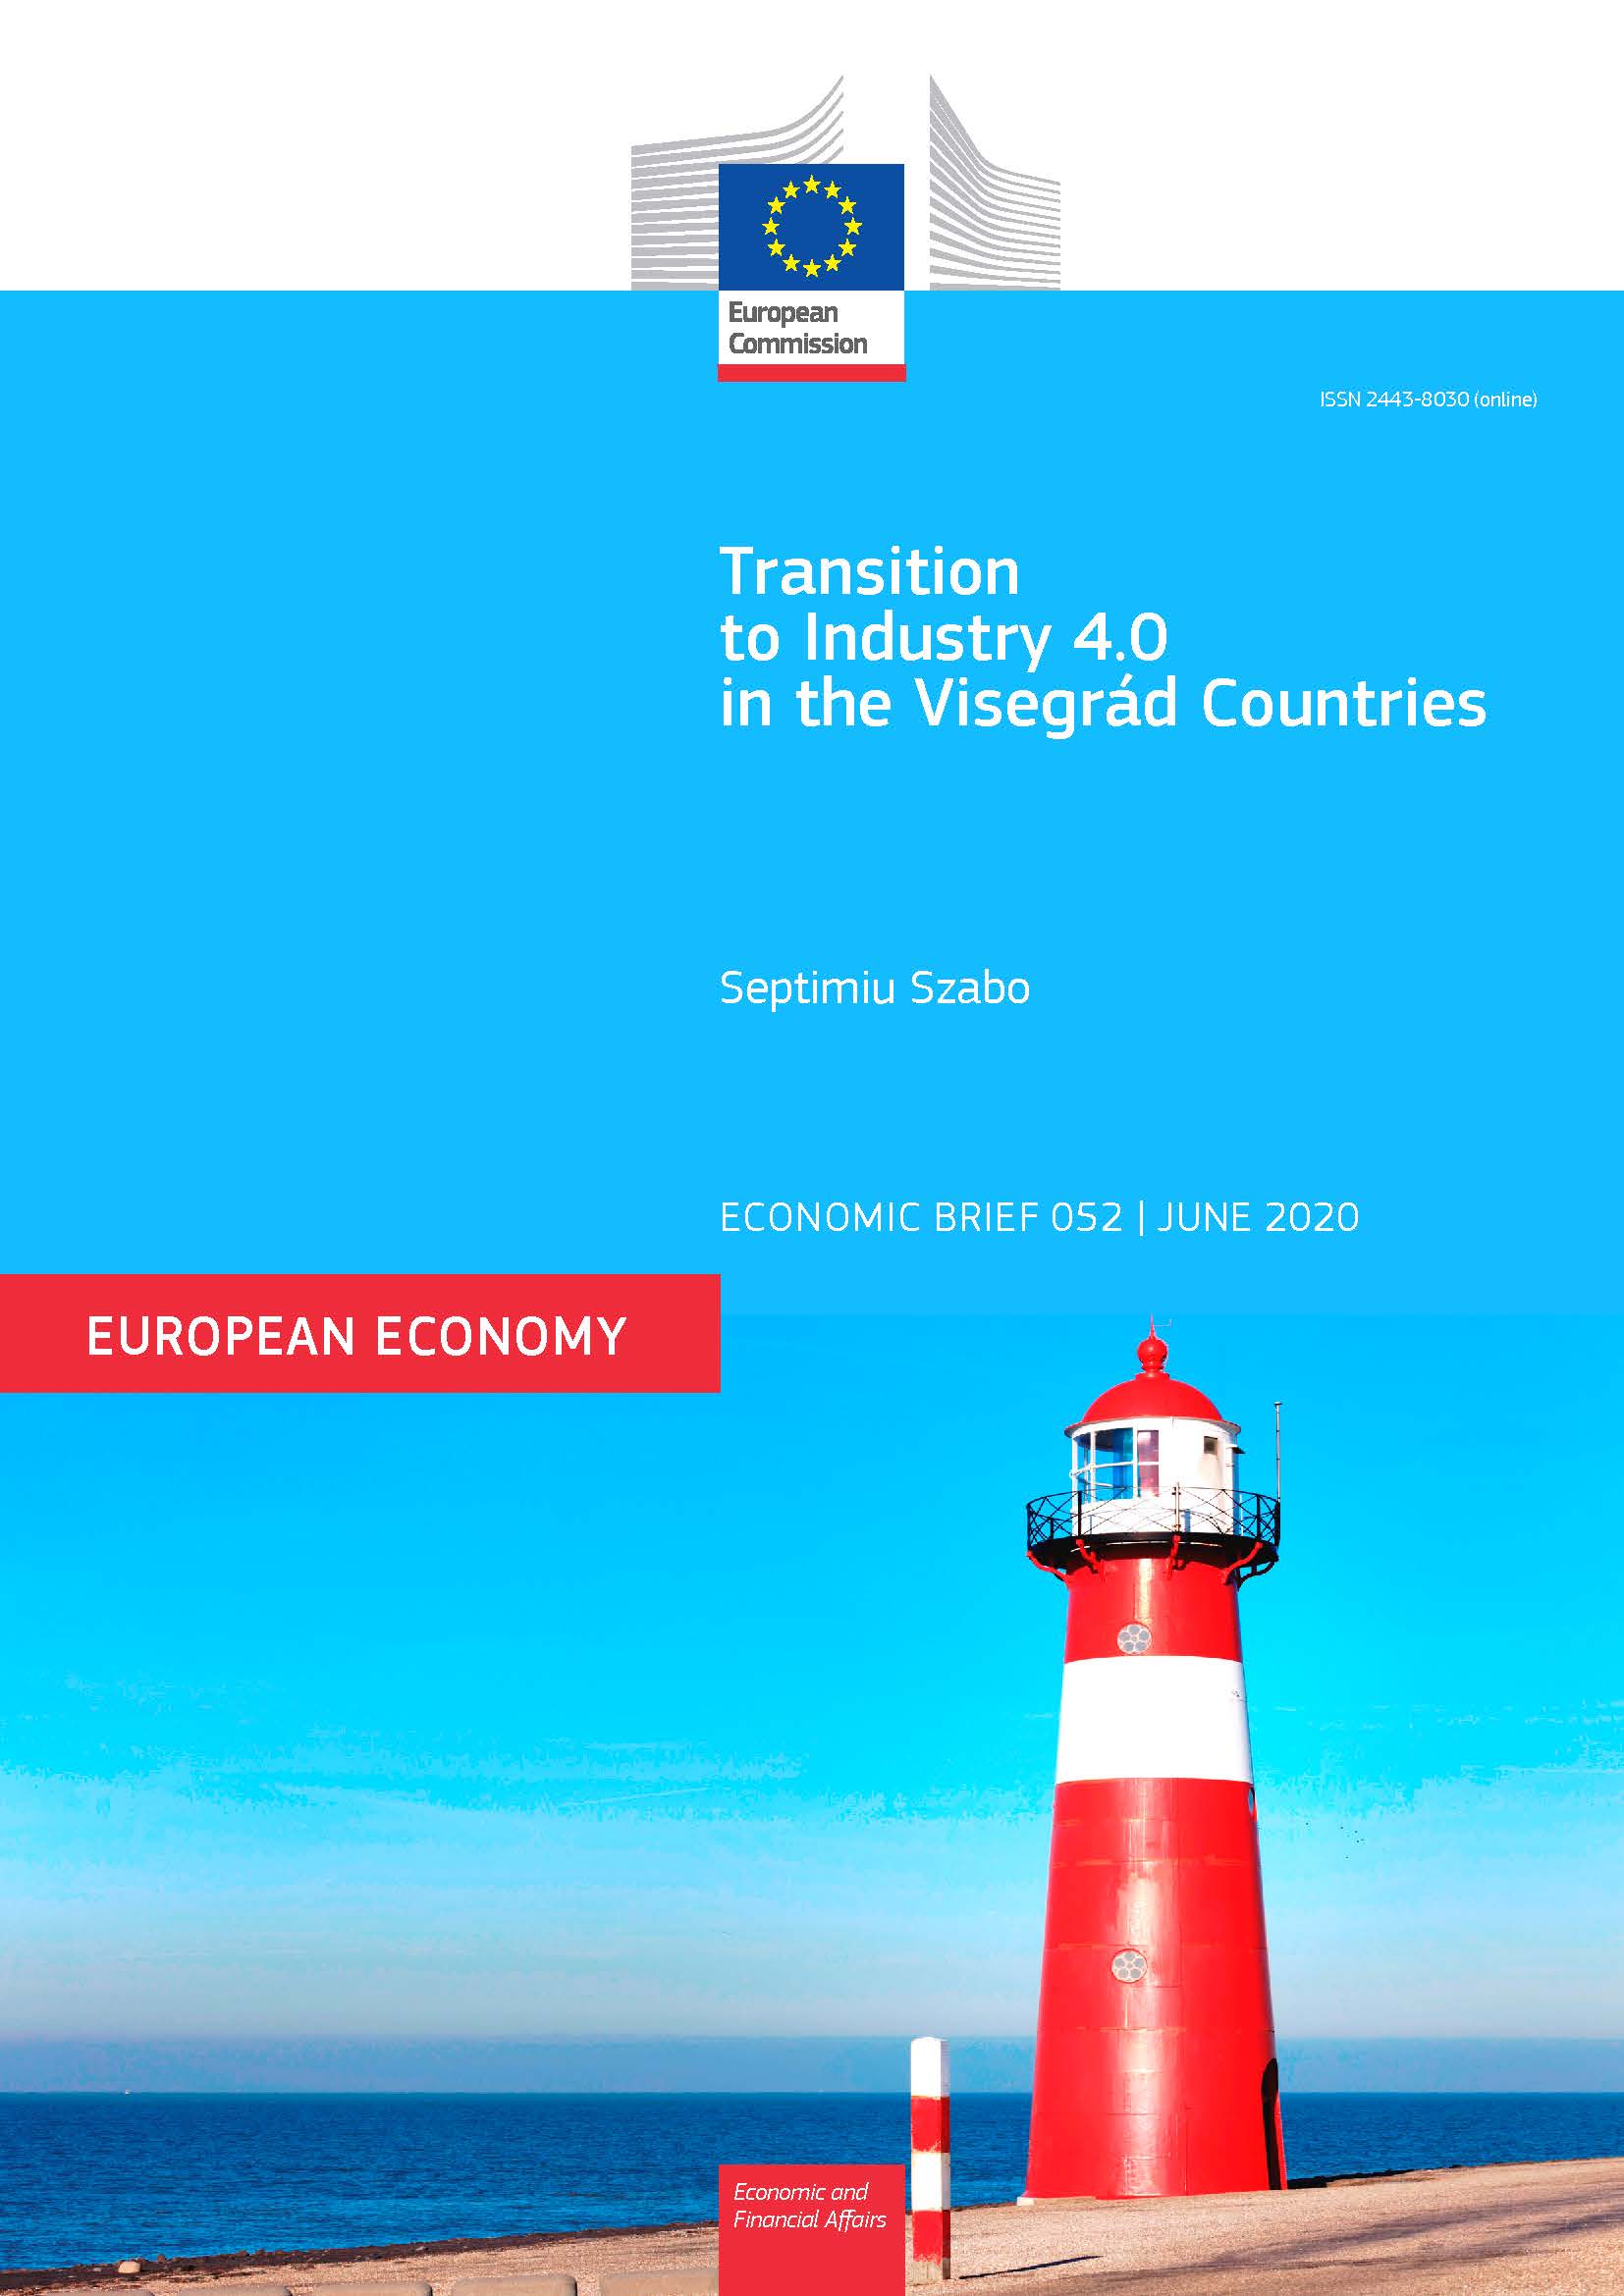 Transition to Industry 4.0 in the Visegrád Countries